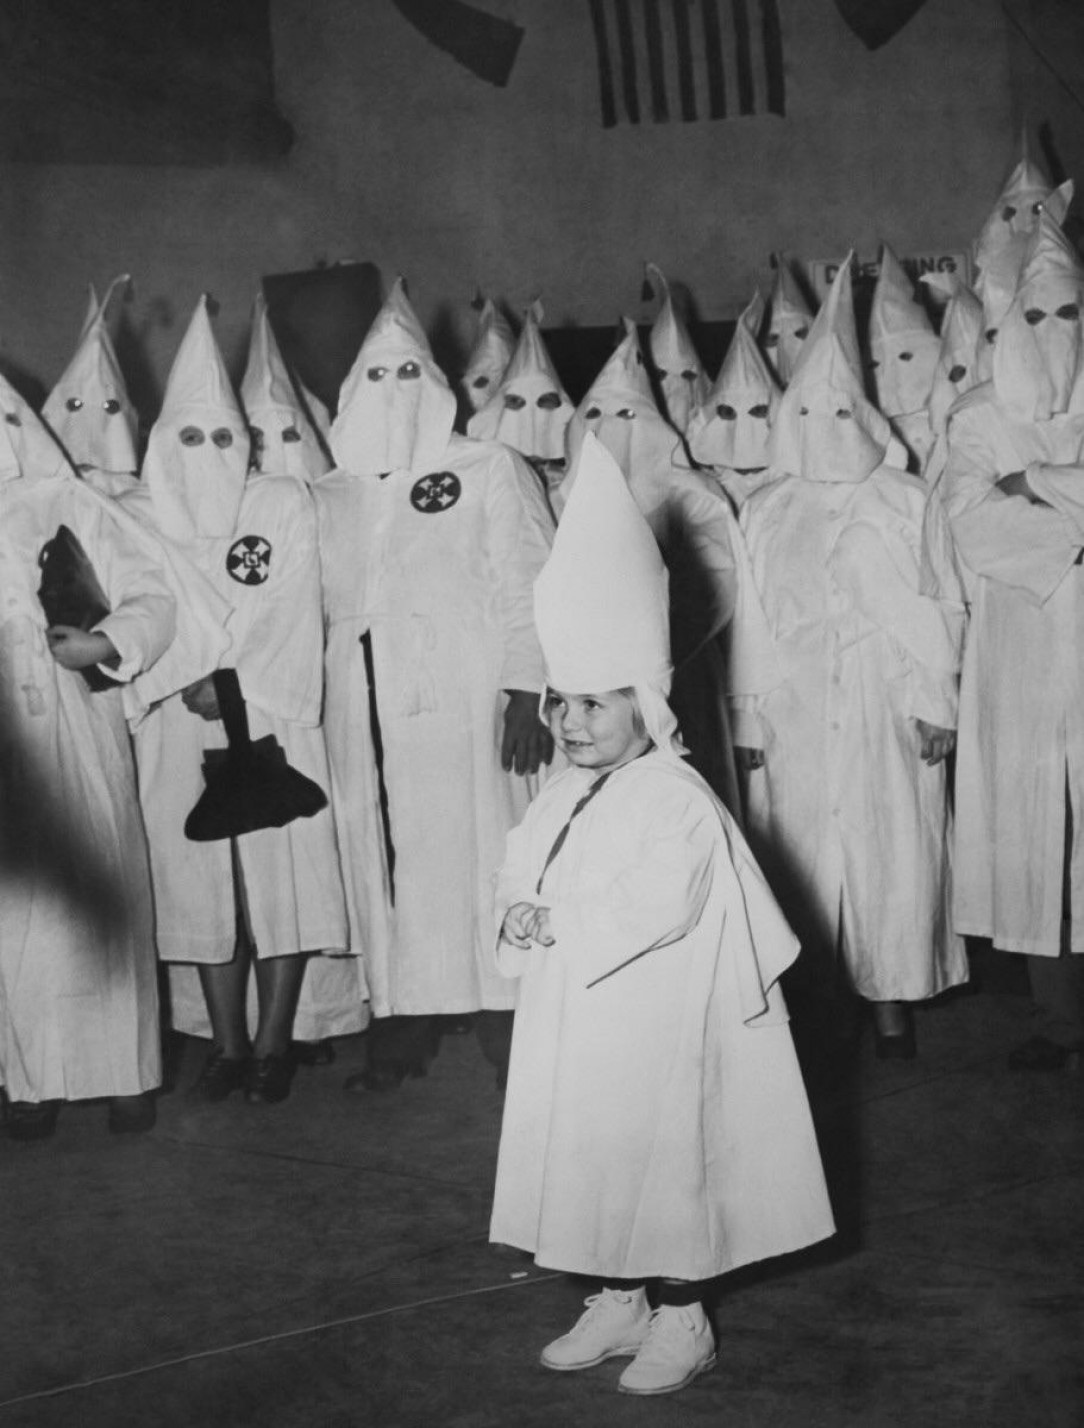 The KKK used to run a youth group called the Klu Klux Kiddies